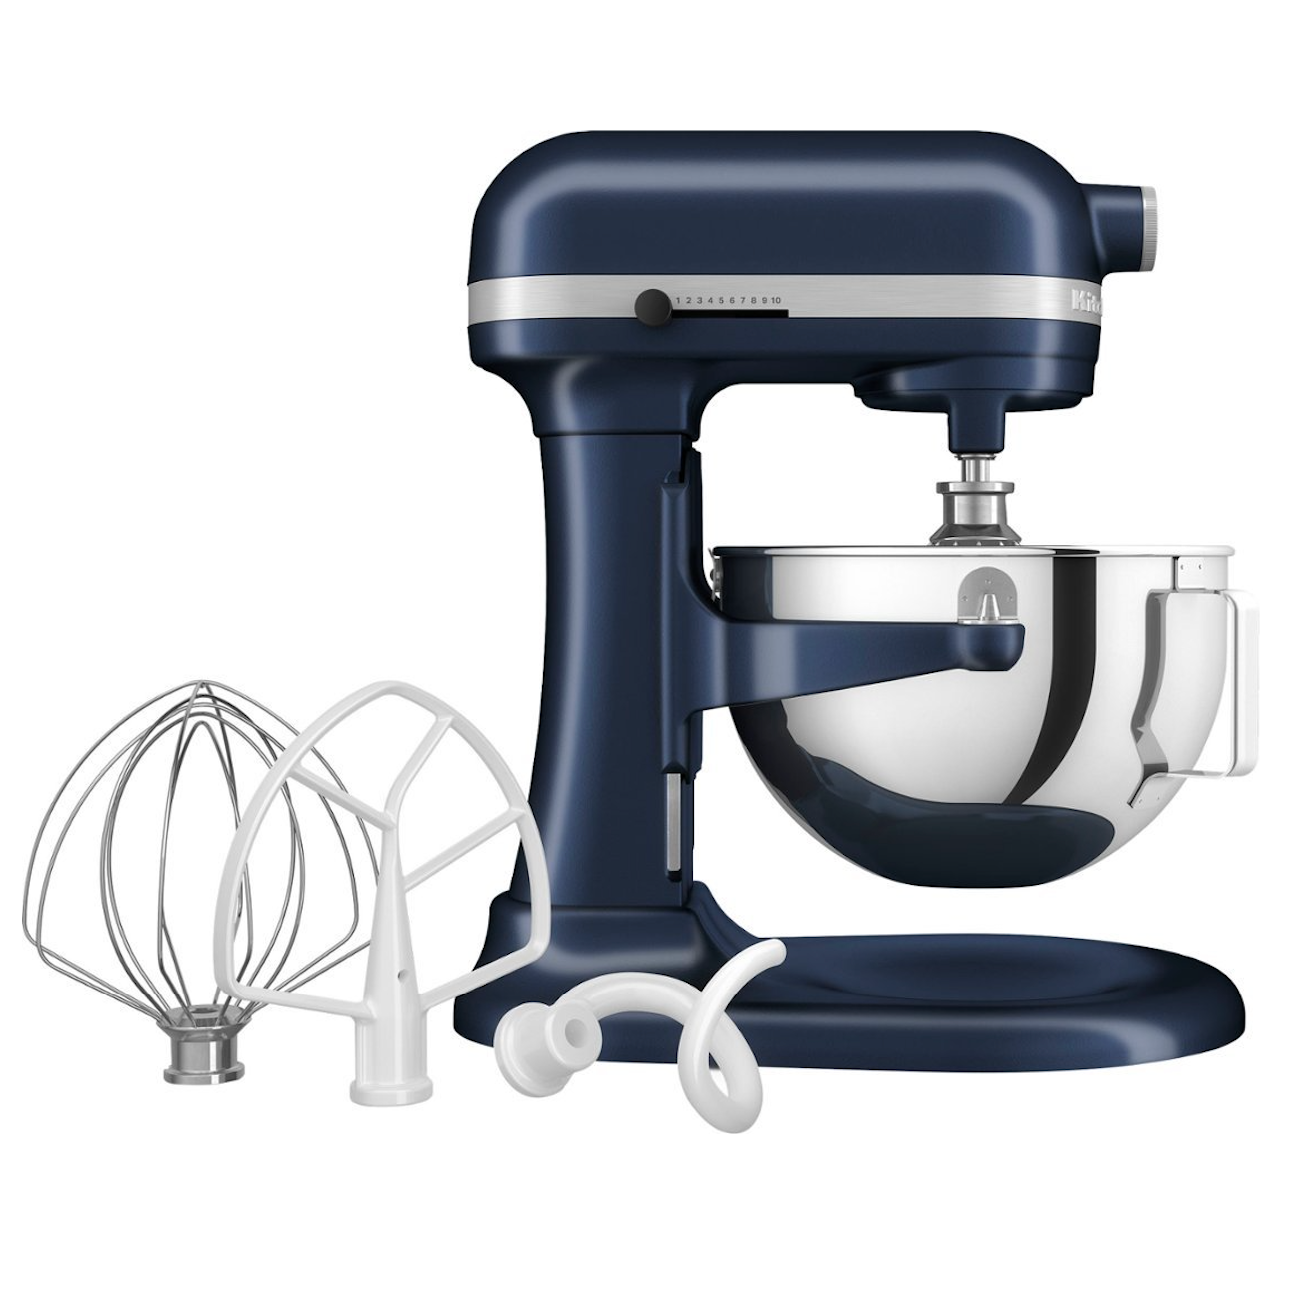 The KitchenAid Deluxe 4.5-quart stand mixer is just $259 for Cyber